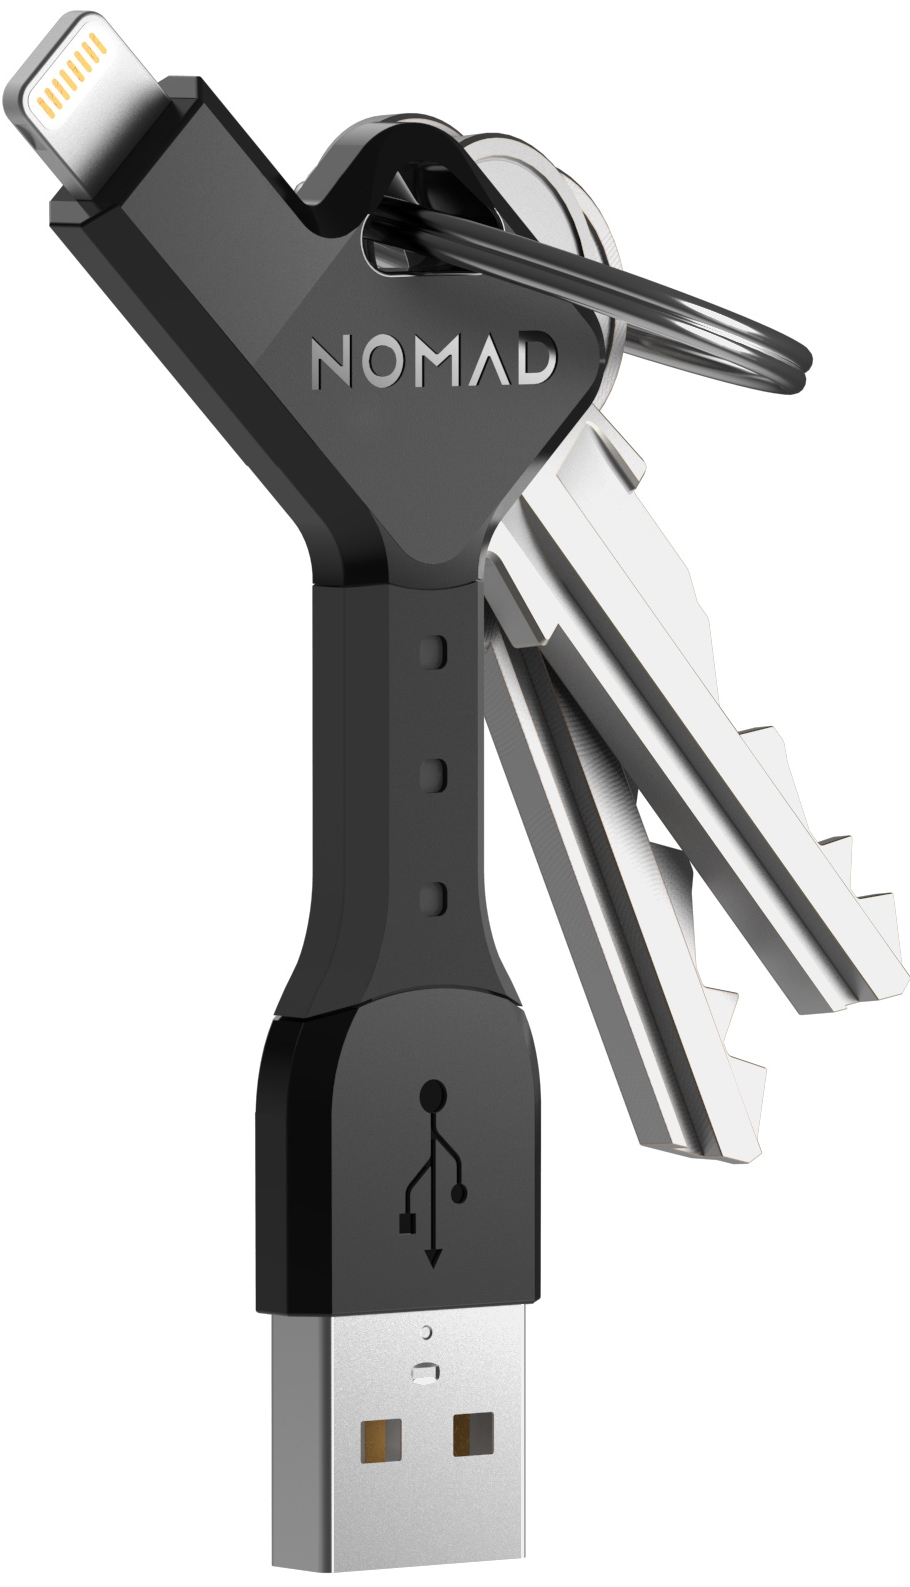 Nomad Goods Key for iPhone, $19.95